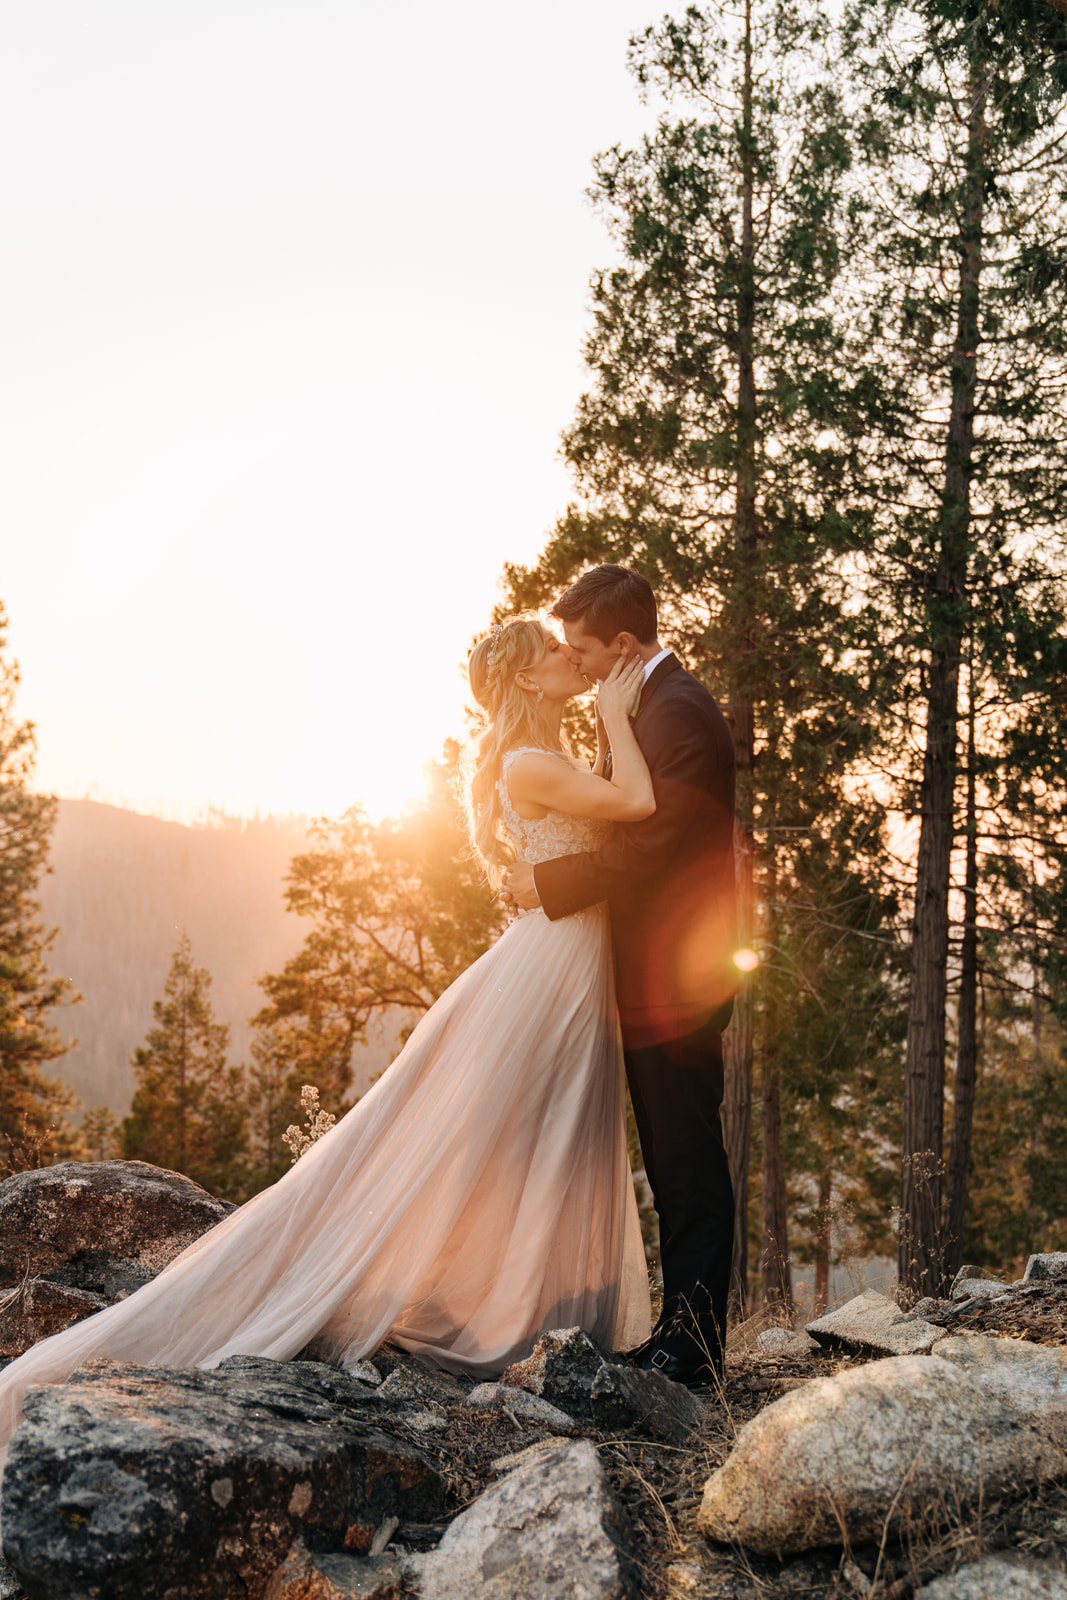 Beautiful lighting for elopement day timeline